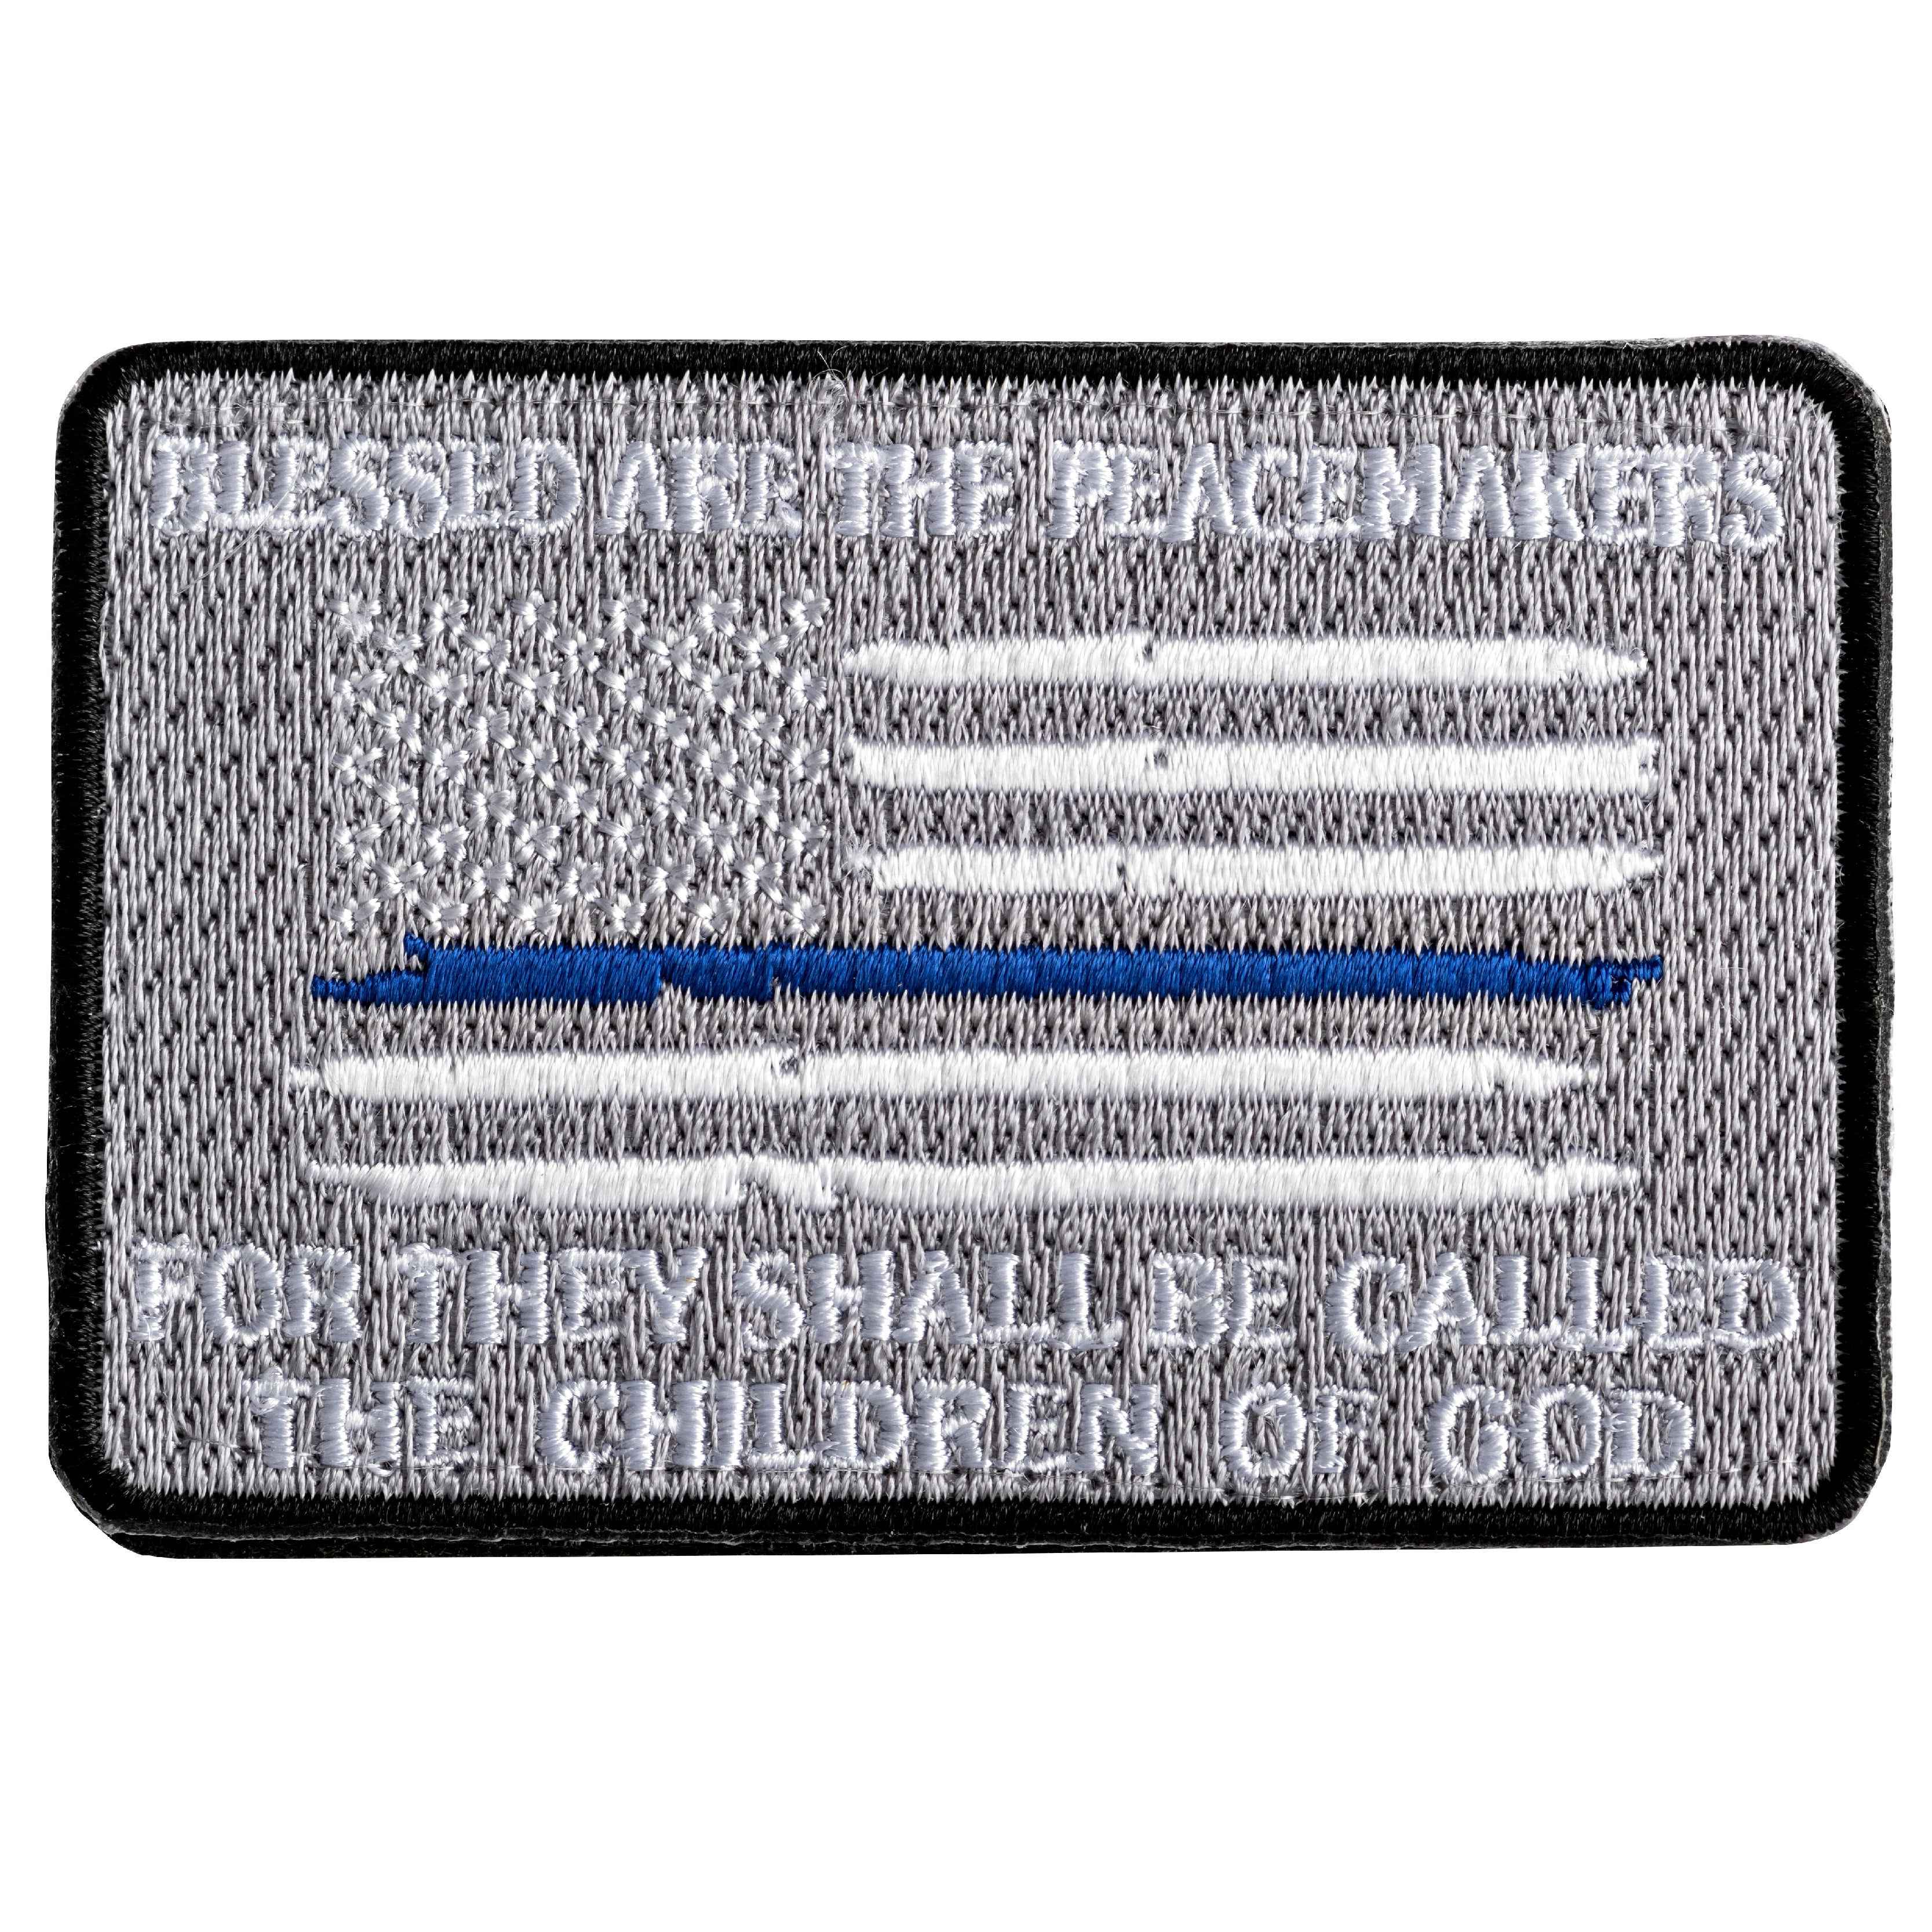 First Responder Thin Blue Line Patch